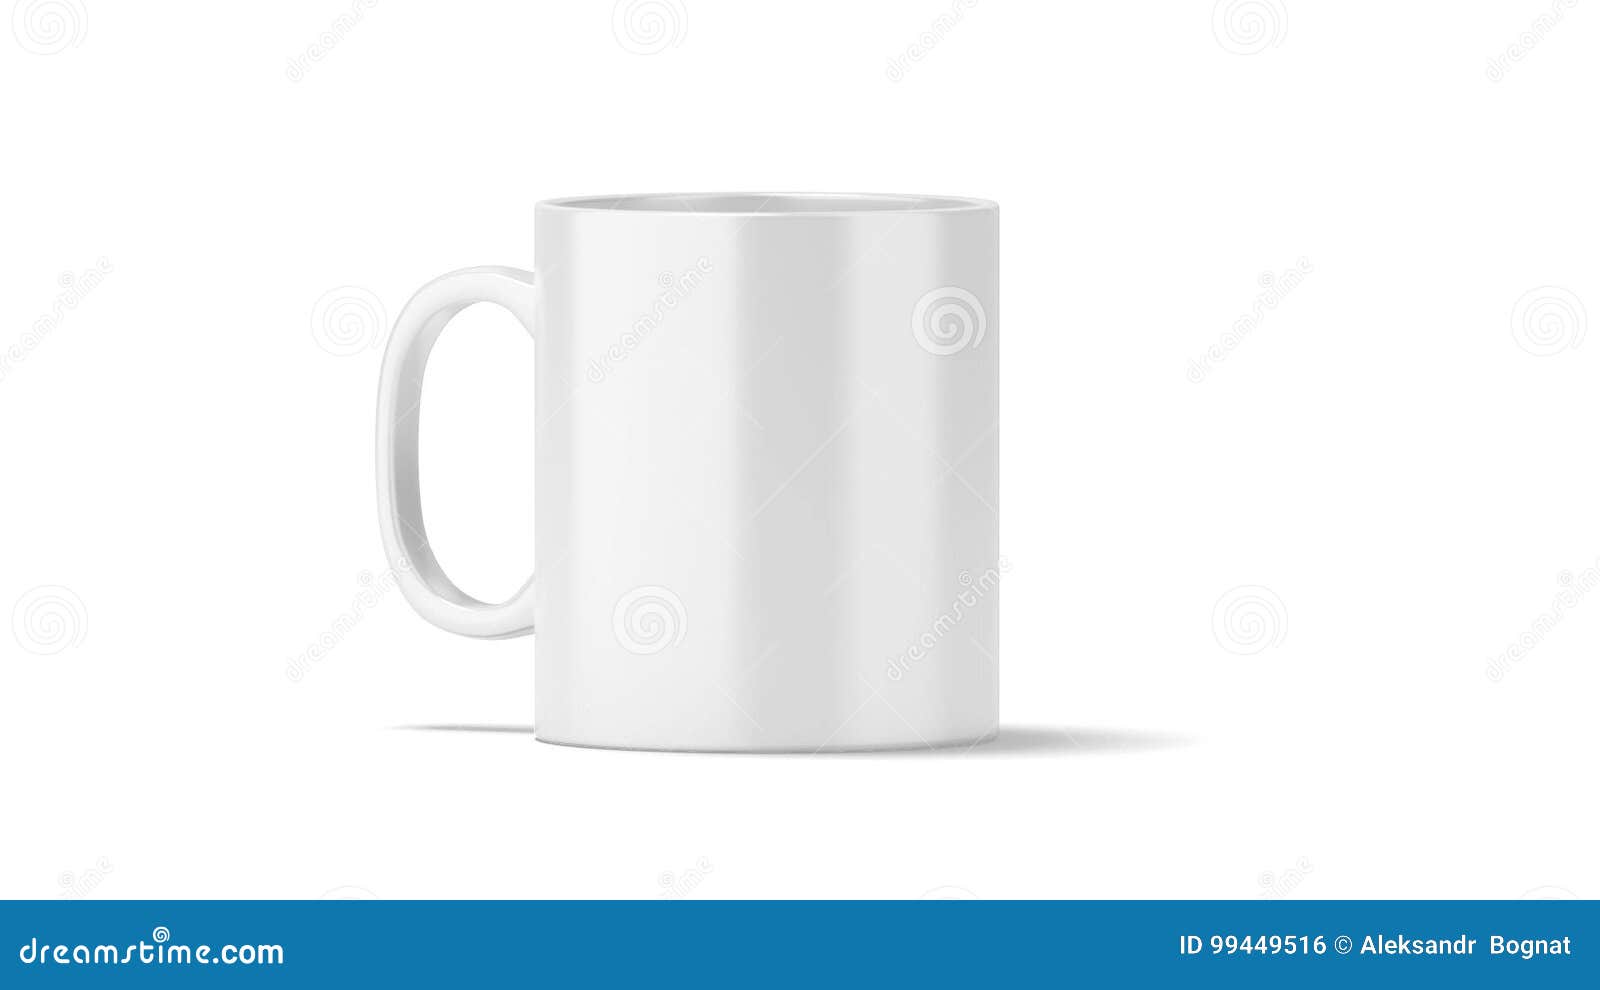 https://thumbs.dreamstime.com/z/blank-white-coffee-mug-mock-up-isolated-front-view-looped-rotation-d-rendering-clear-oz-cup-sublimation-printing-branding-99449516.jpg